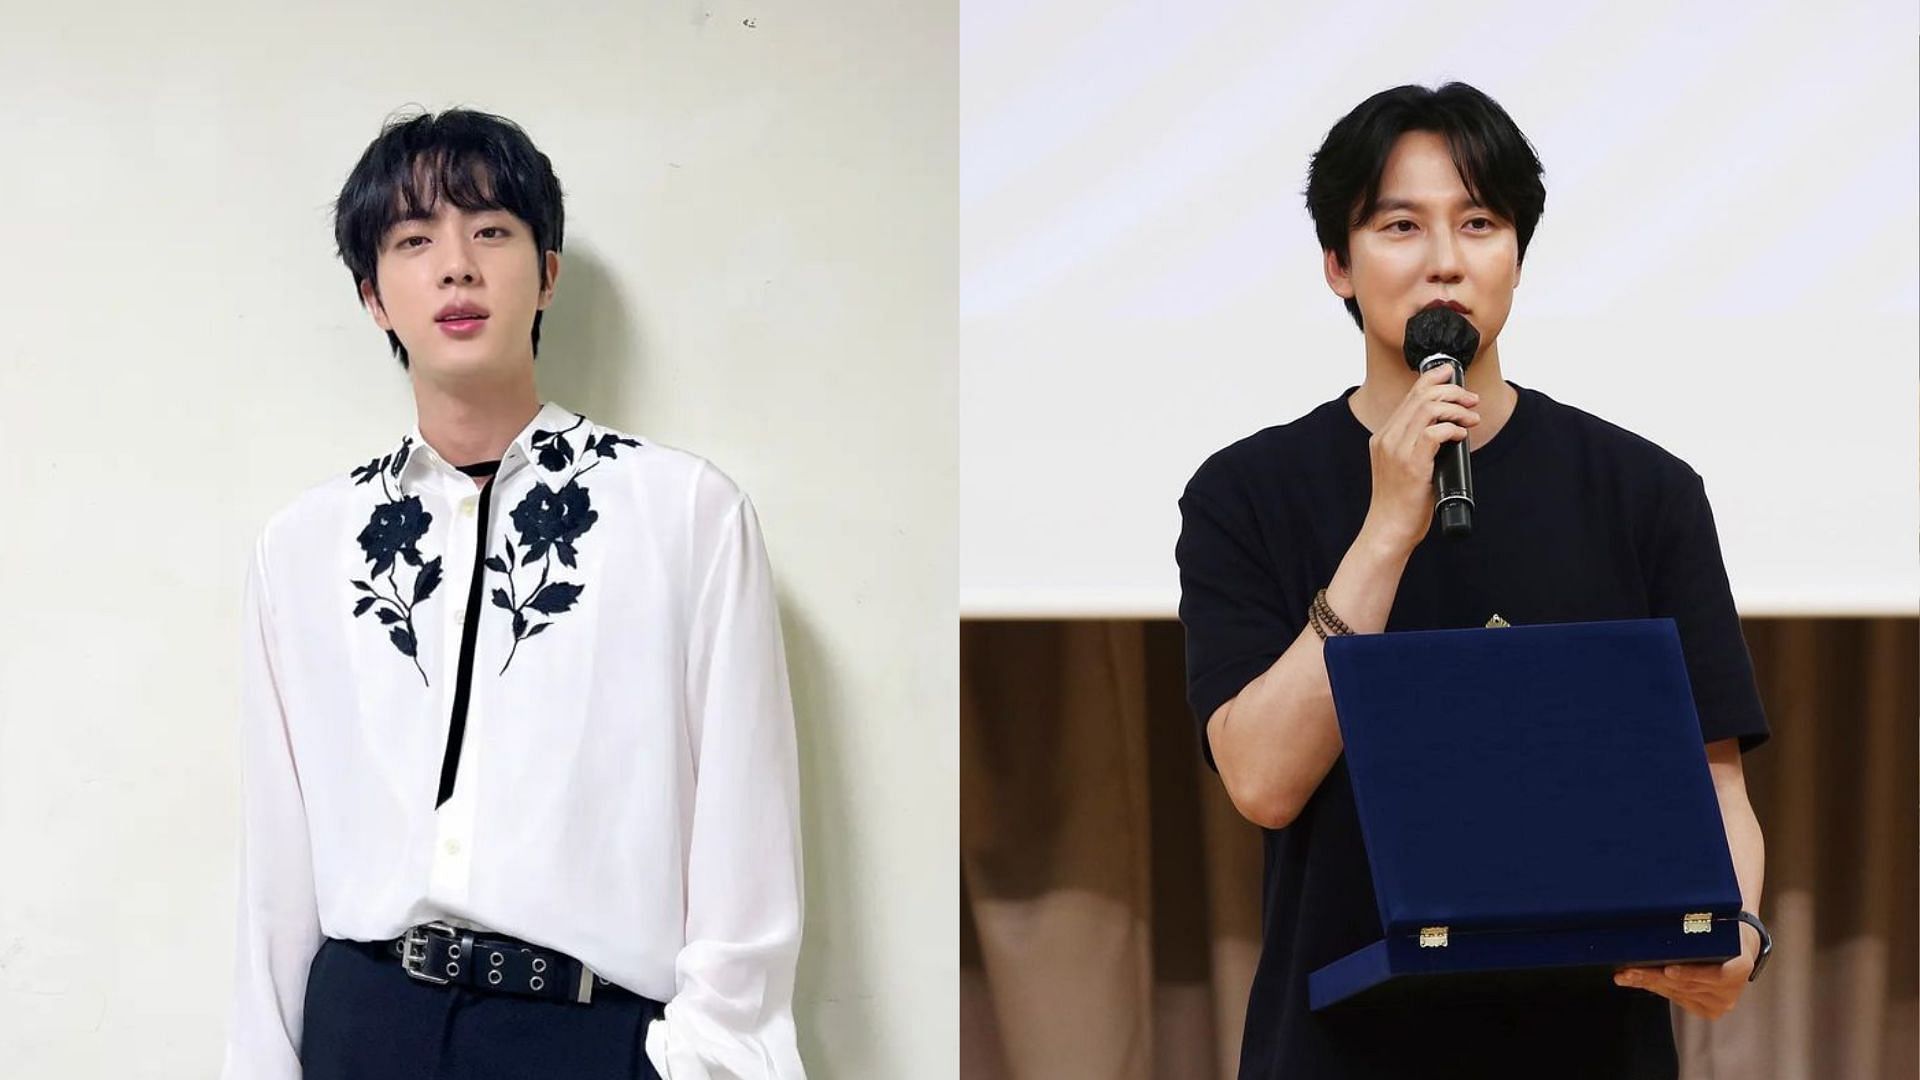 Fans speculate BTS&#039; Jin will be making an acting debut soon with Kim Nam-gil (Images via Instagram/jin and gilstory_ent)